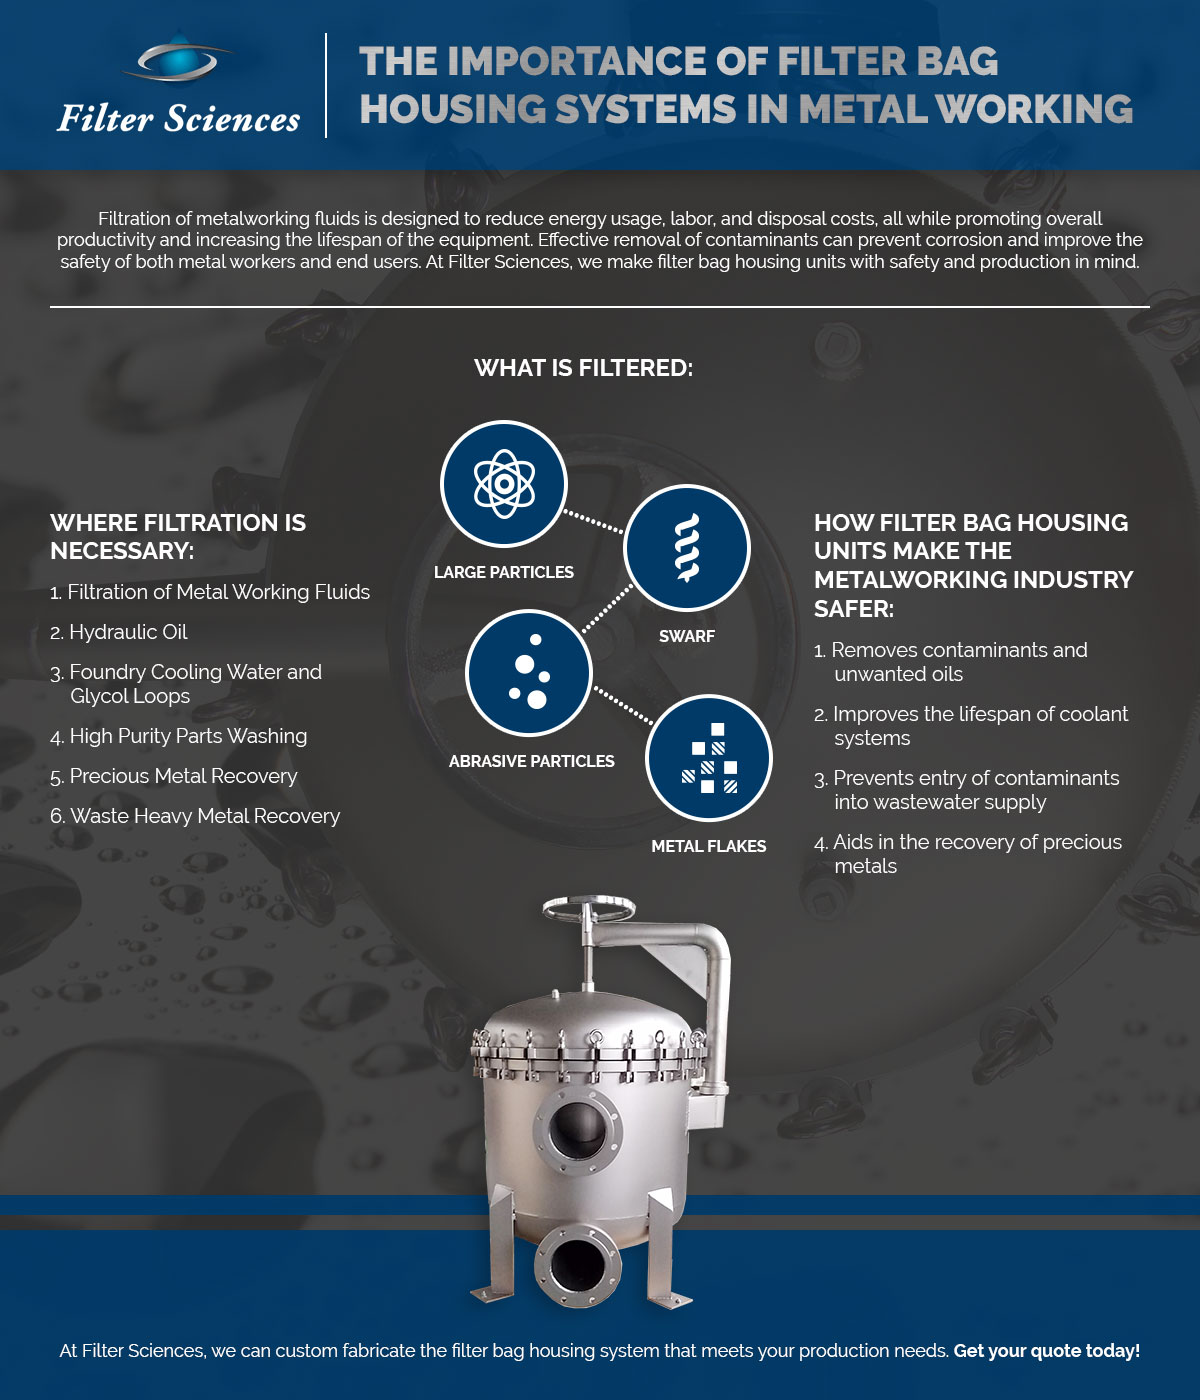 The-Importance-of-Filter-Bag-Housing-Systems-in-Metal-Working-Infographic-5d251734e1343